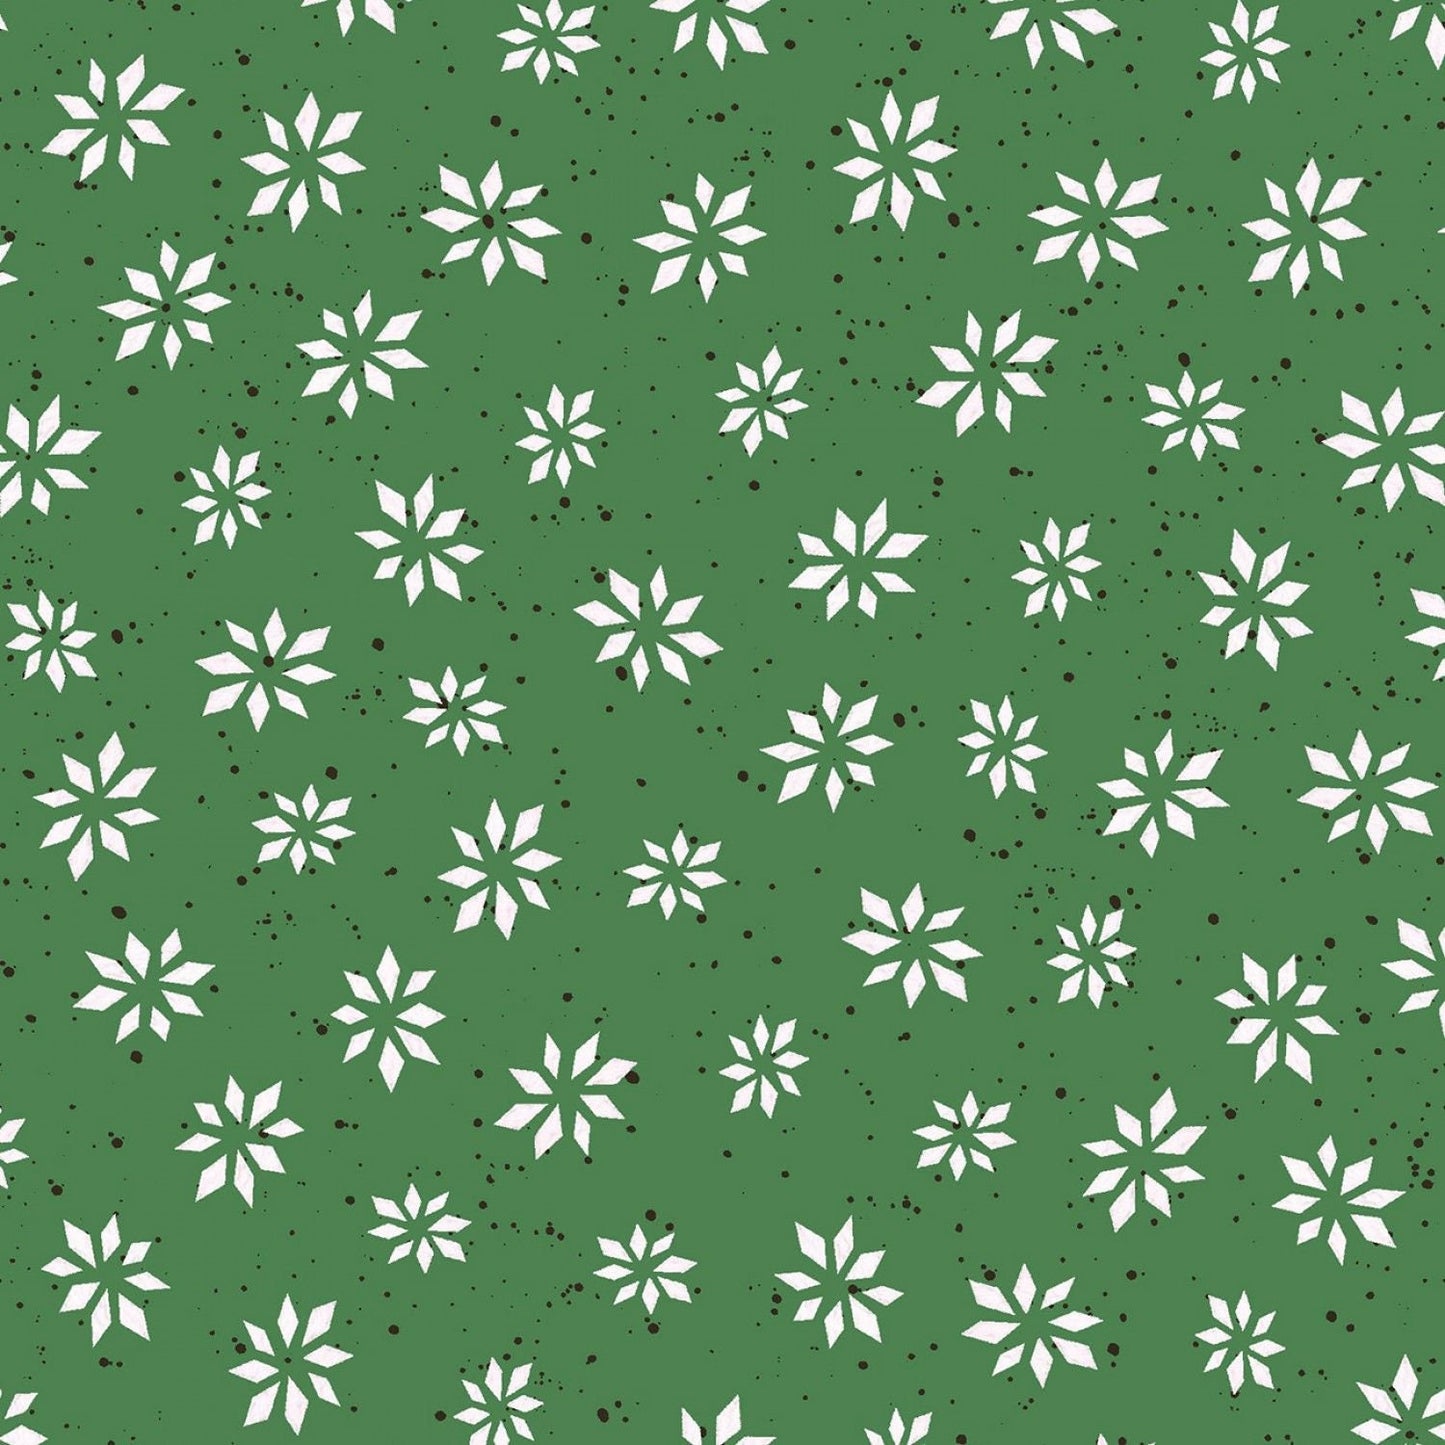 Warm Wishes by Hannah Dale of Wrendale Designs Snowflake Star Green D6316M-G Digitally Printed Cotton Woven Fabric